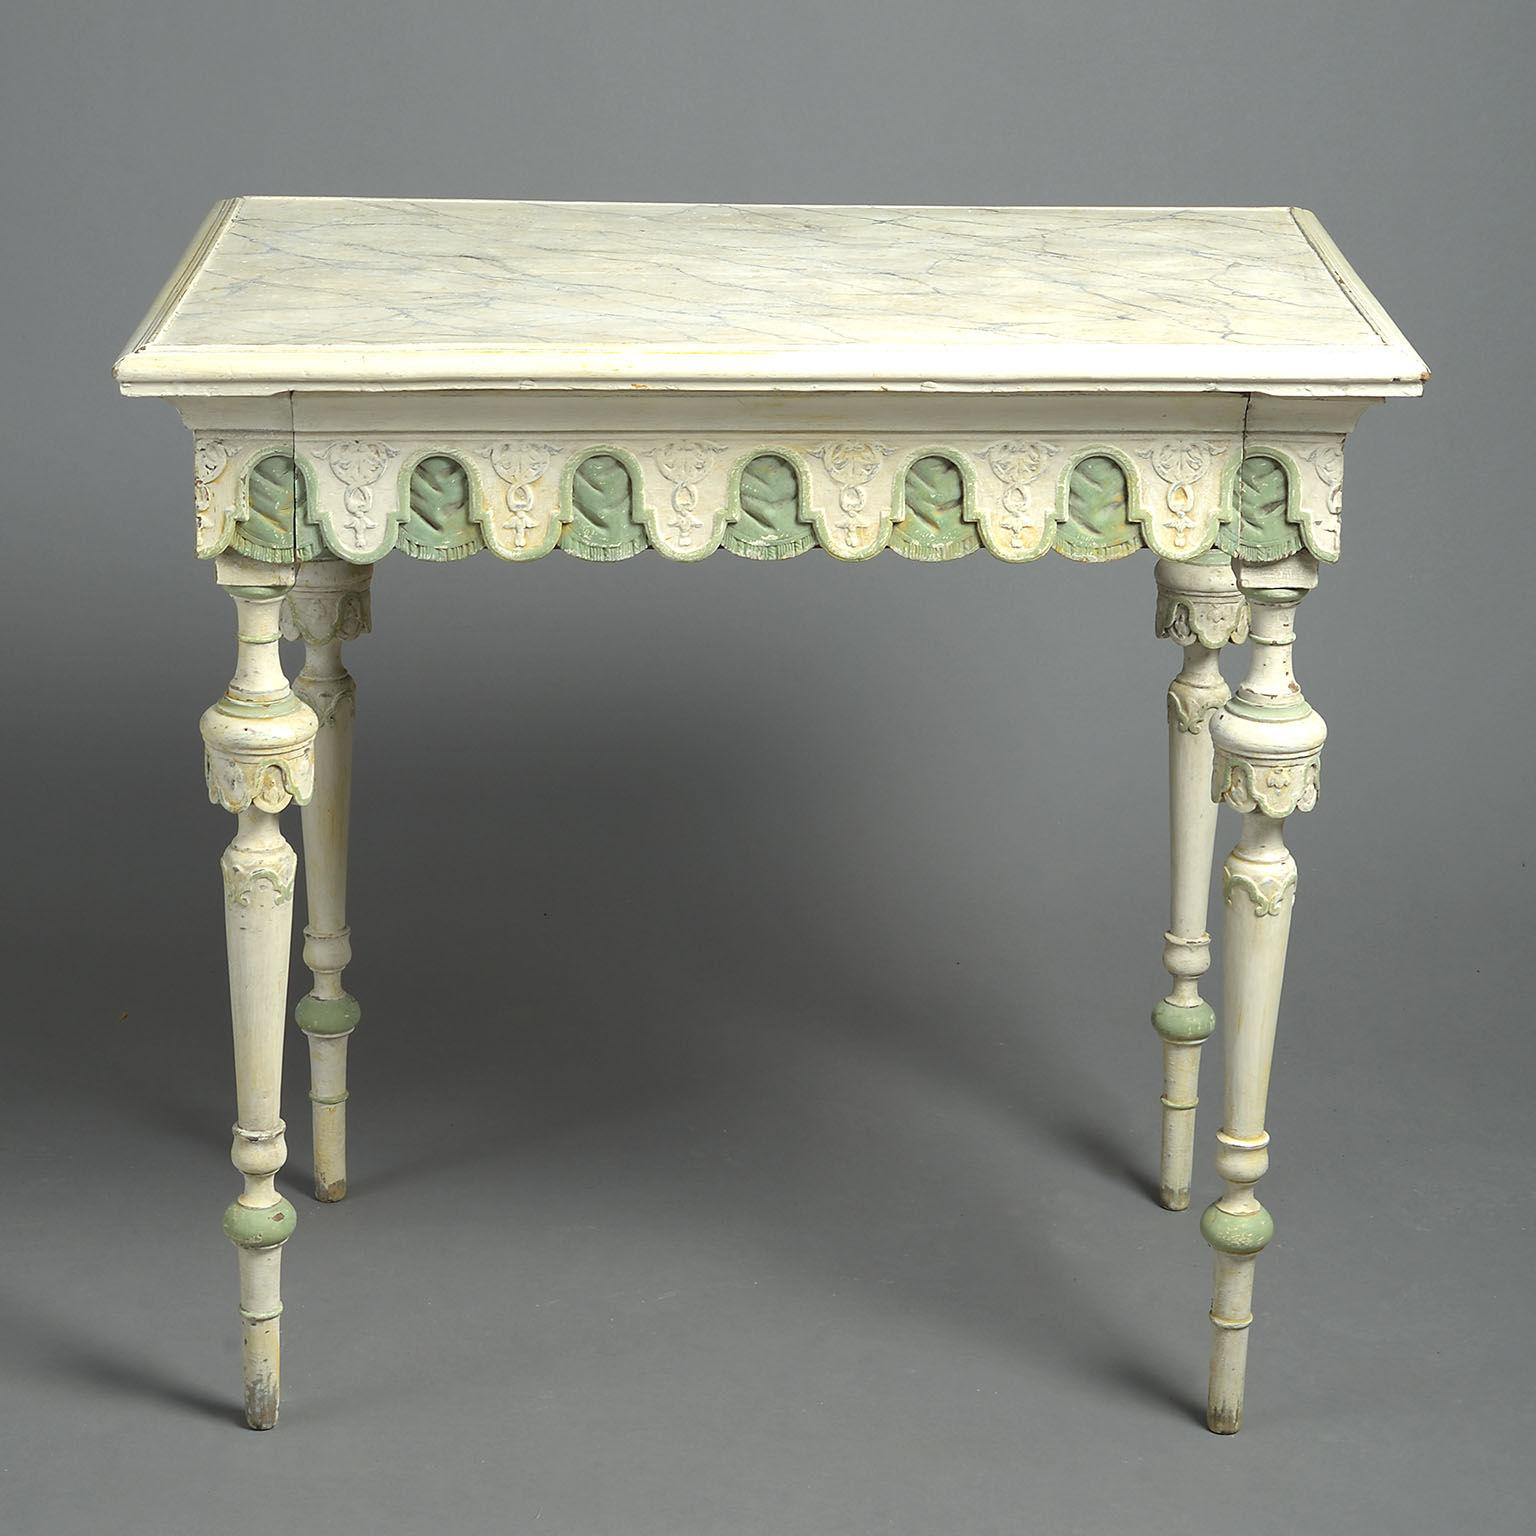 The faux marble-top over the lambrequin-carved frieze with one hidden drawer, raised on turned tapering legs.